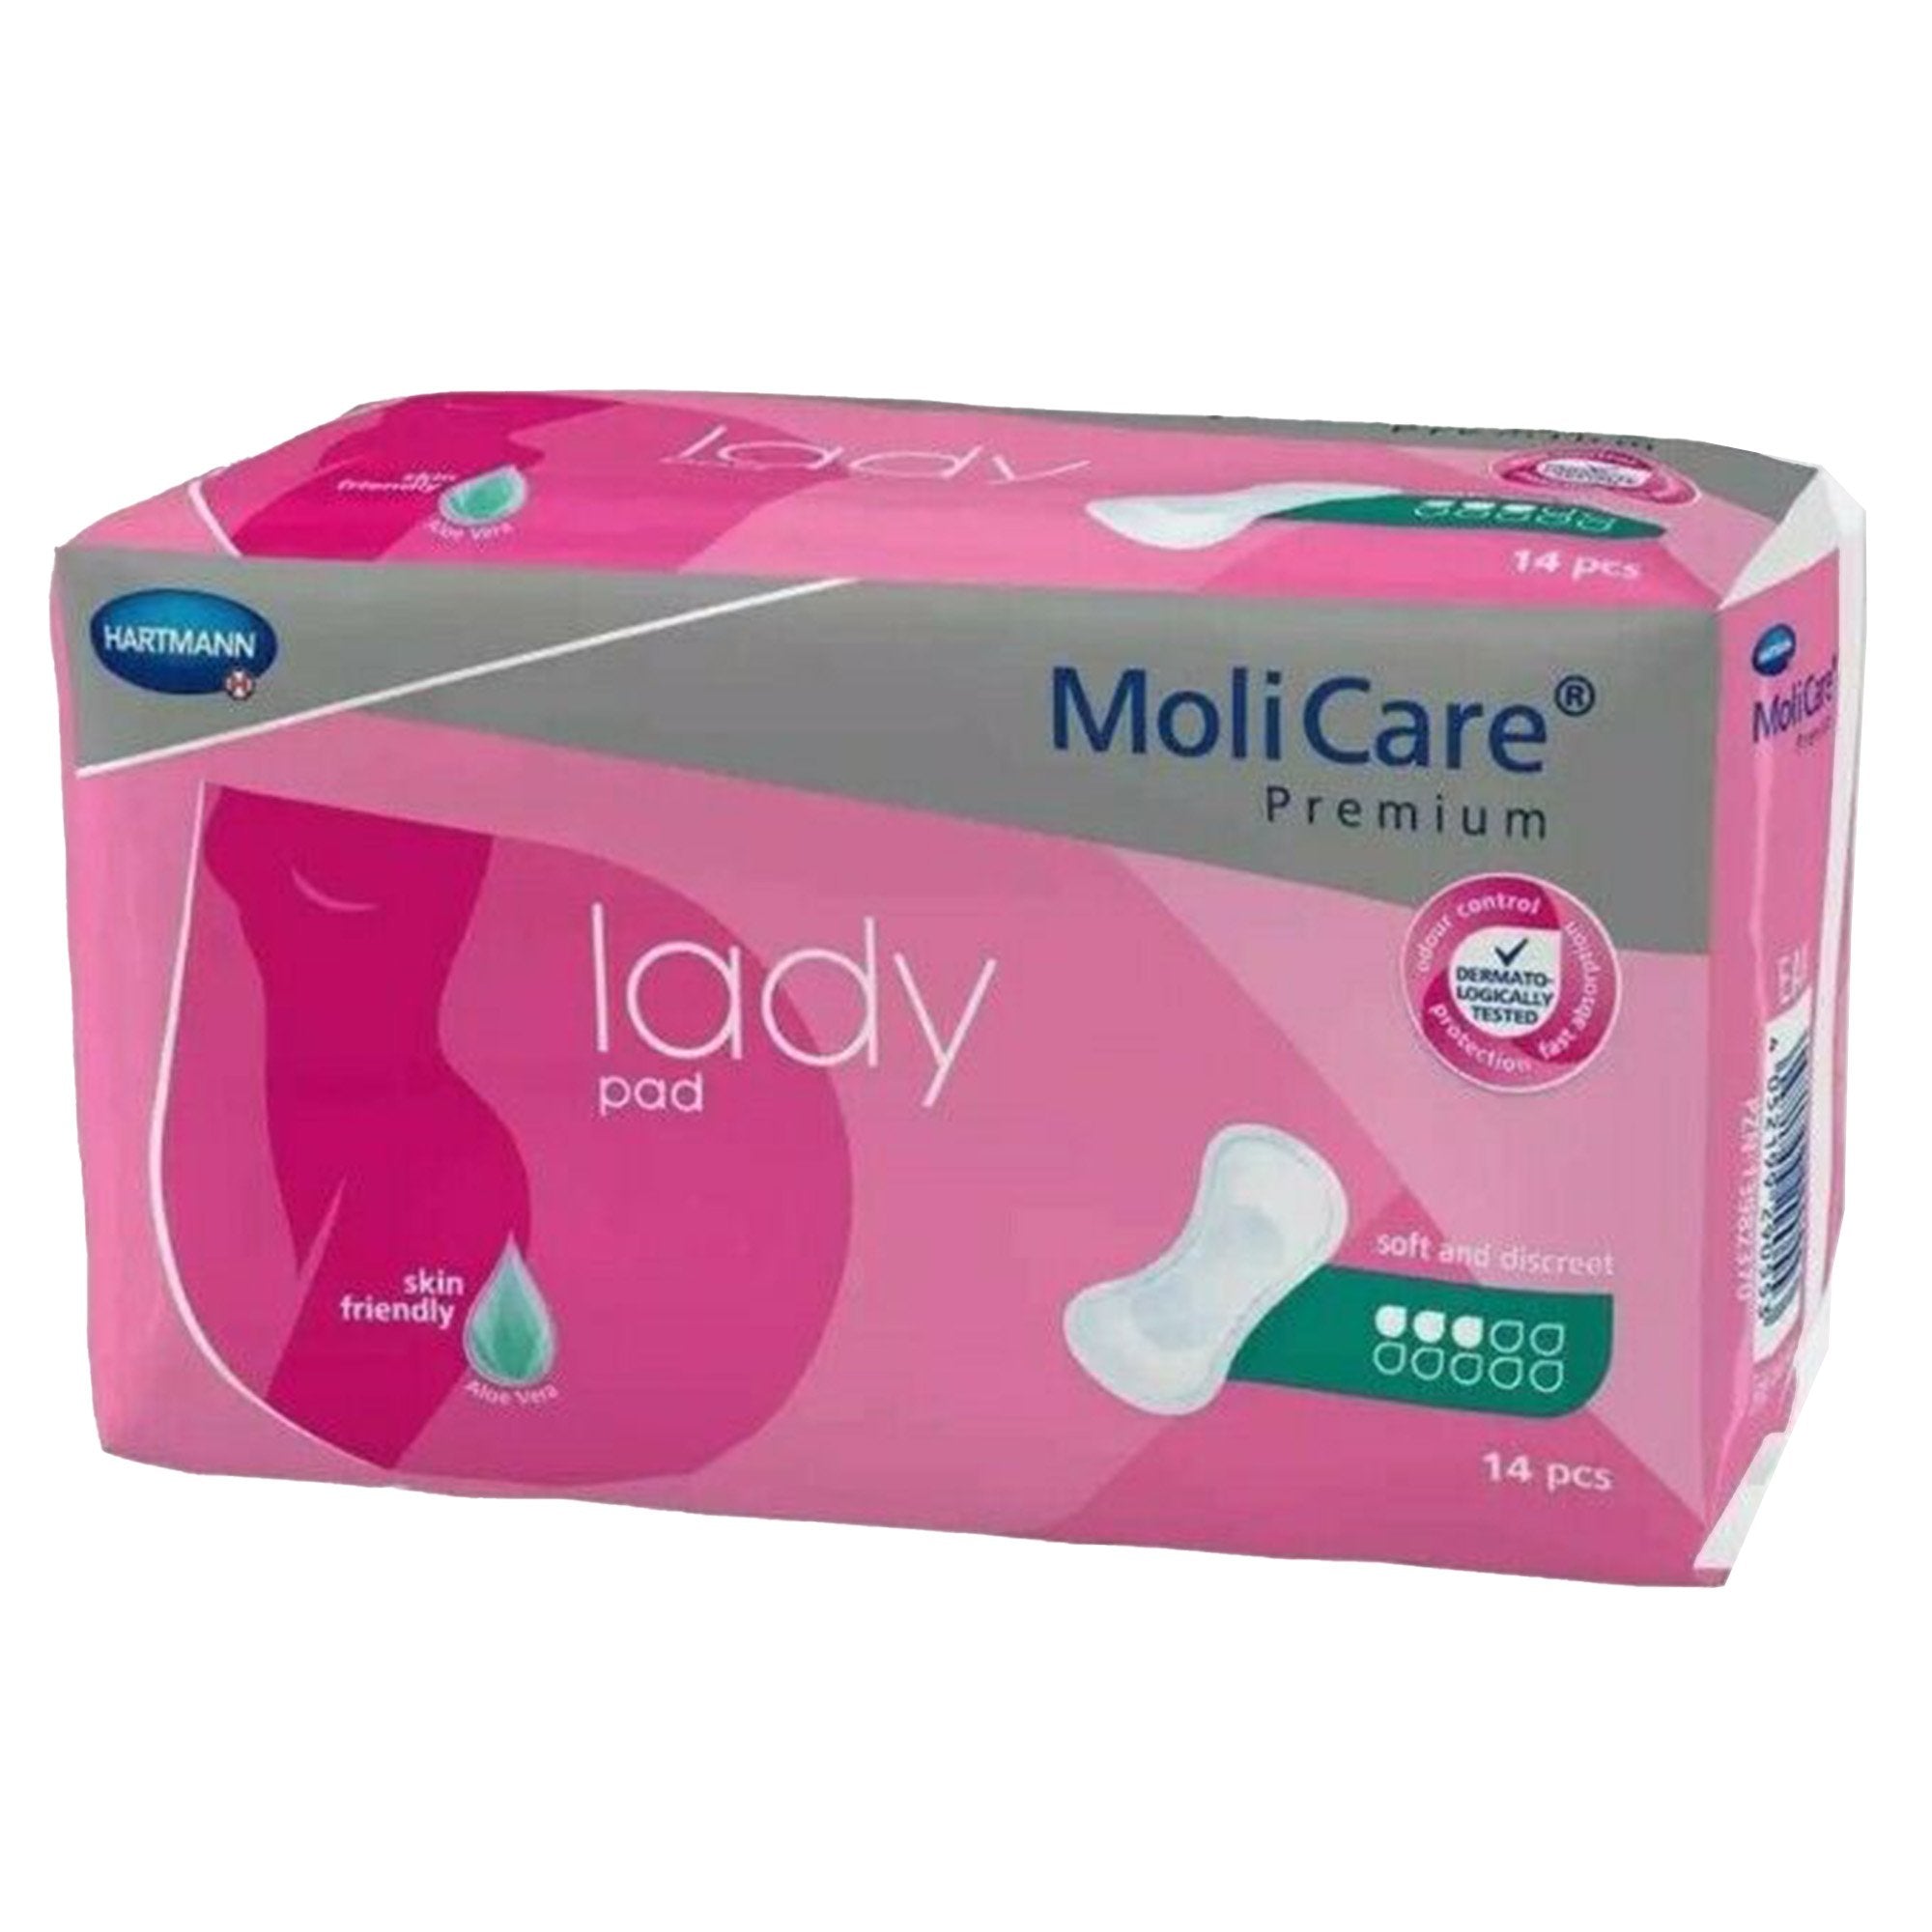 Bladder Control Pad MoliCare® Premium Lady Pads 5-51/2 X 13 Inch Moderate Absorbency Polymer Core One Size Fits Most